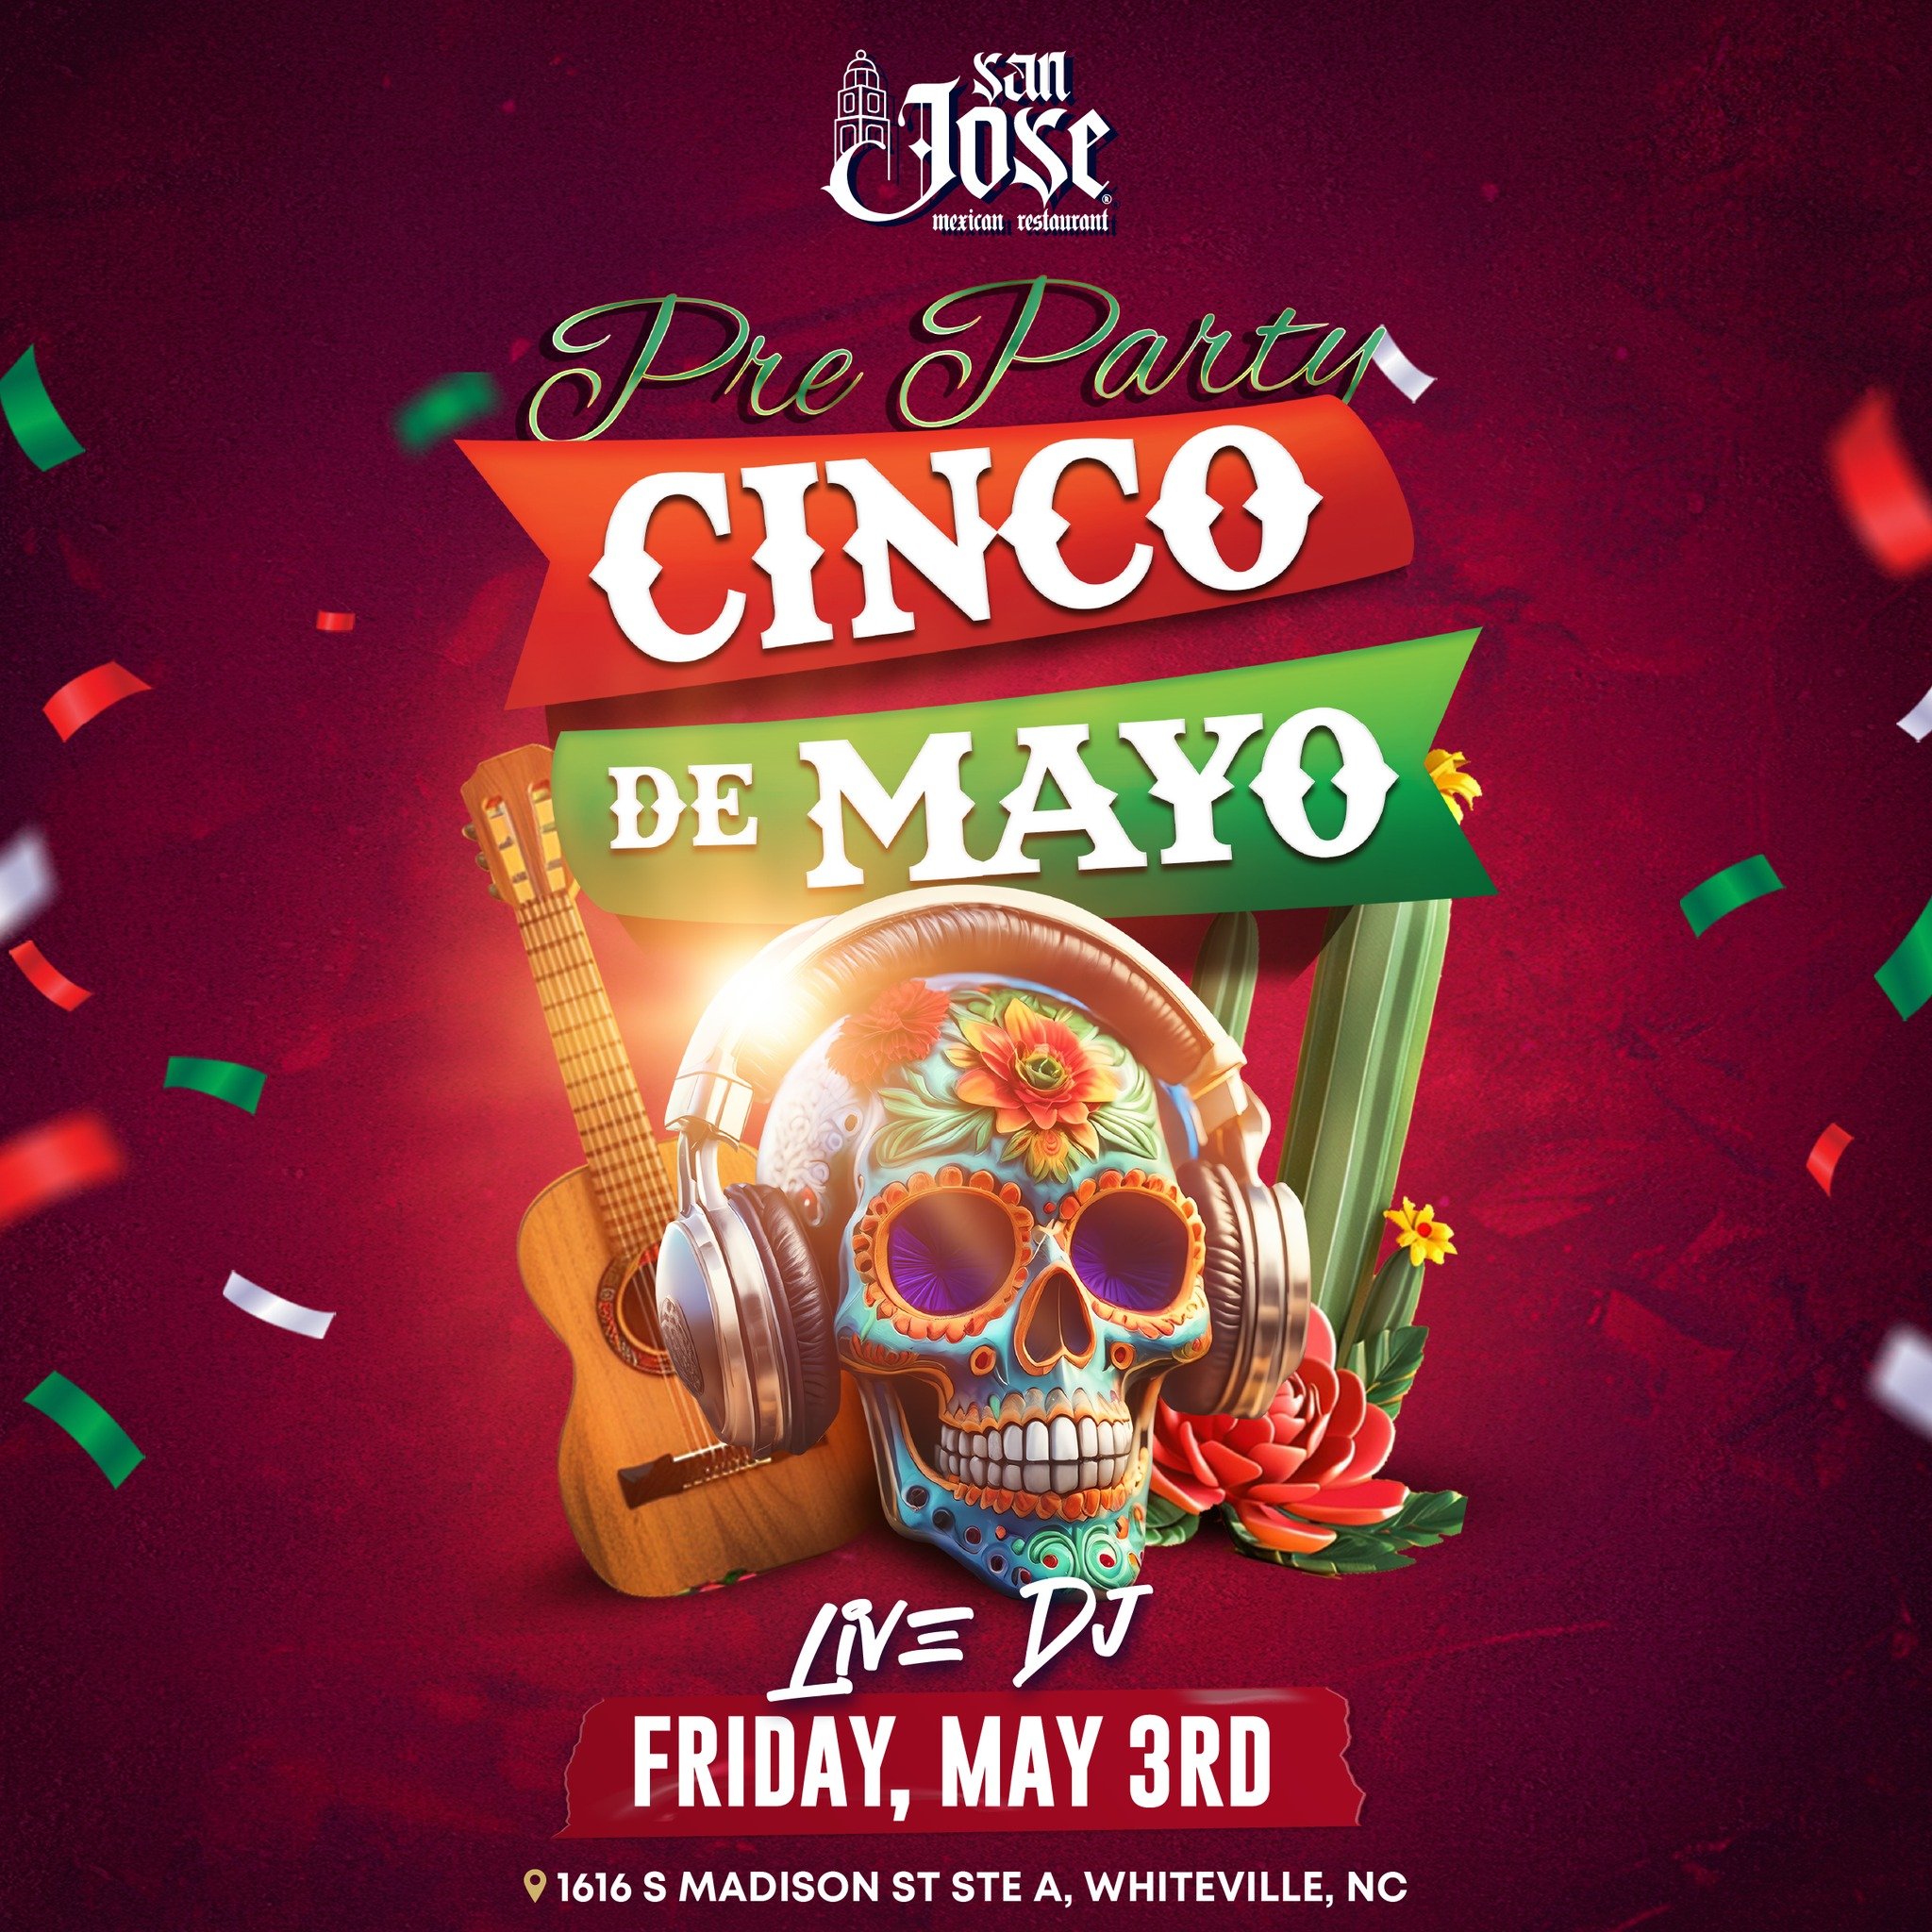 This Friday, May 3rd start your Cinco de Mayo weekend right! 🇲🇽🎶We've got a live DJ, the best margaritas, and a vibe that&rsquo;s sure to get you in the fiesta mood! 🍸👯

📍 1616 S. Madison Street Whiteville, NC 28472

#whitevillenc #cincodemayo 